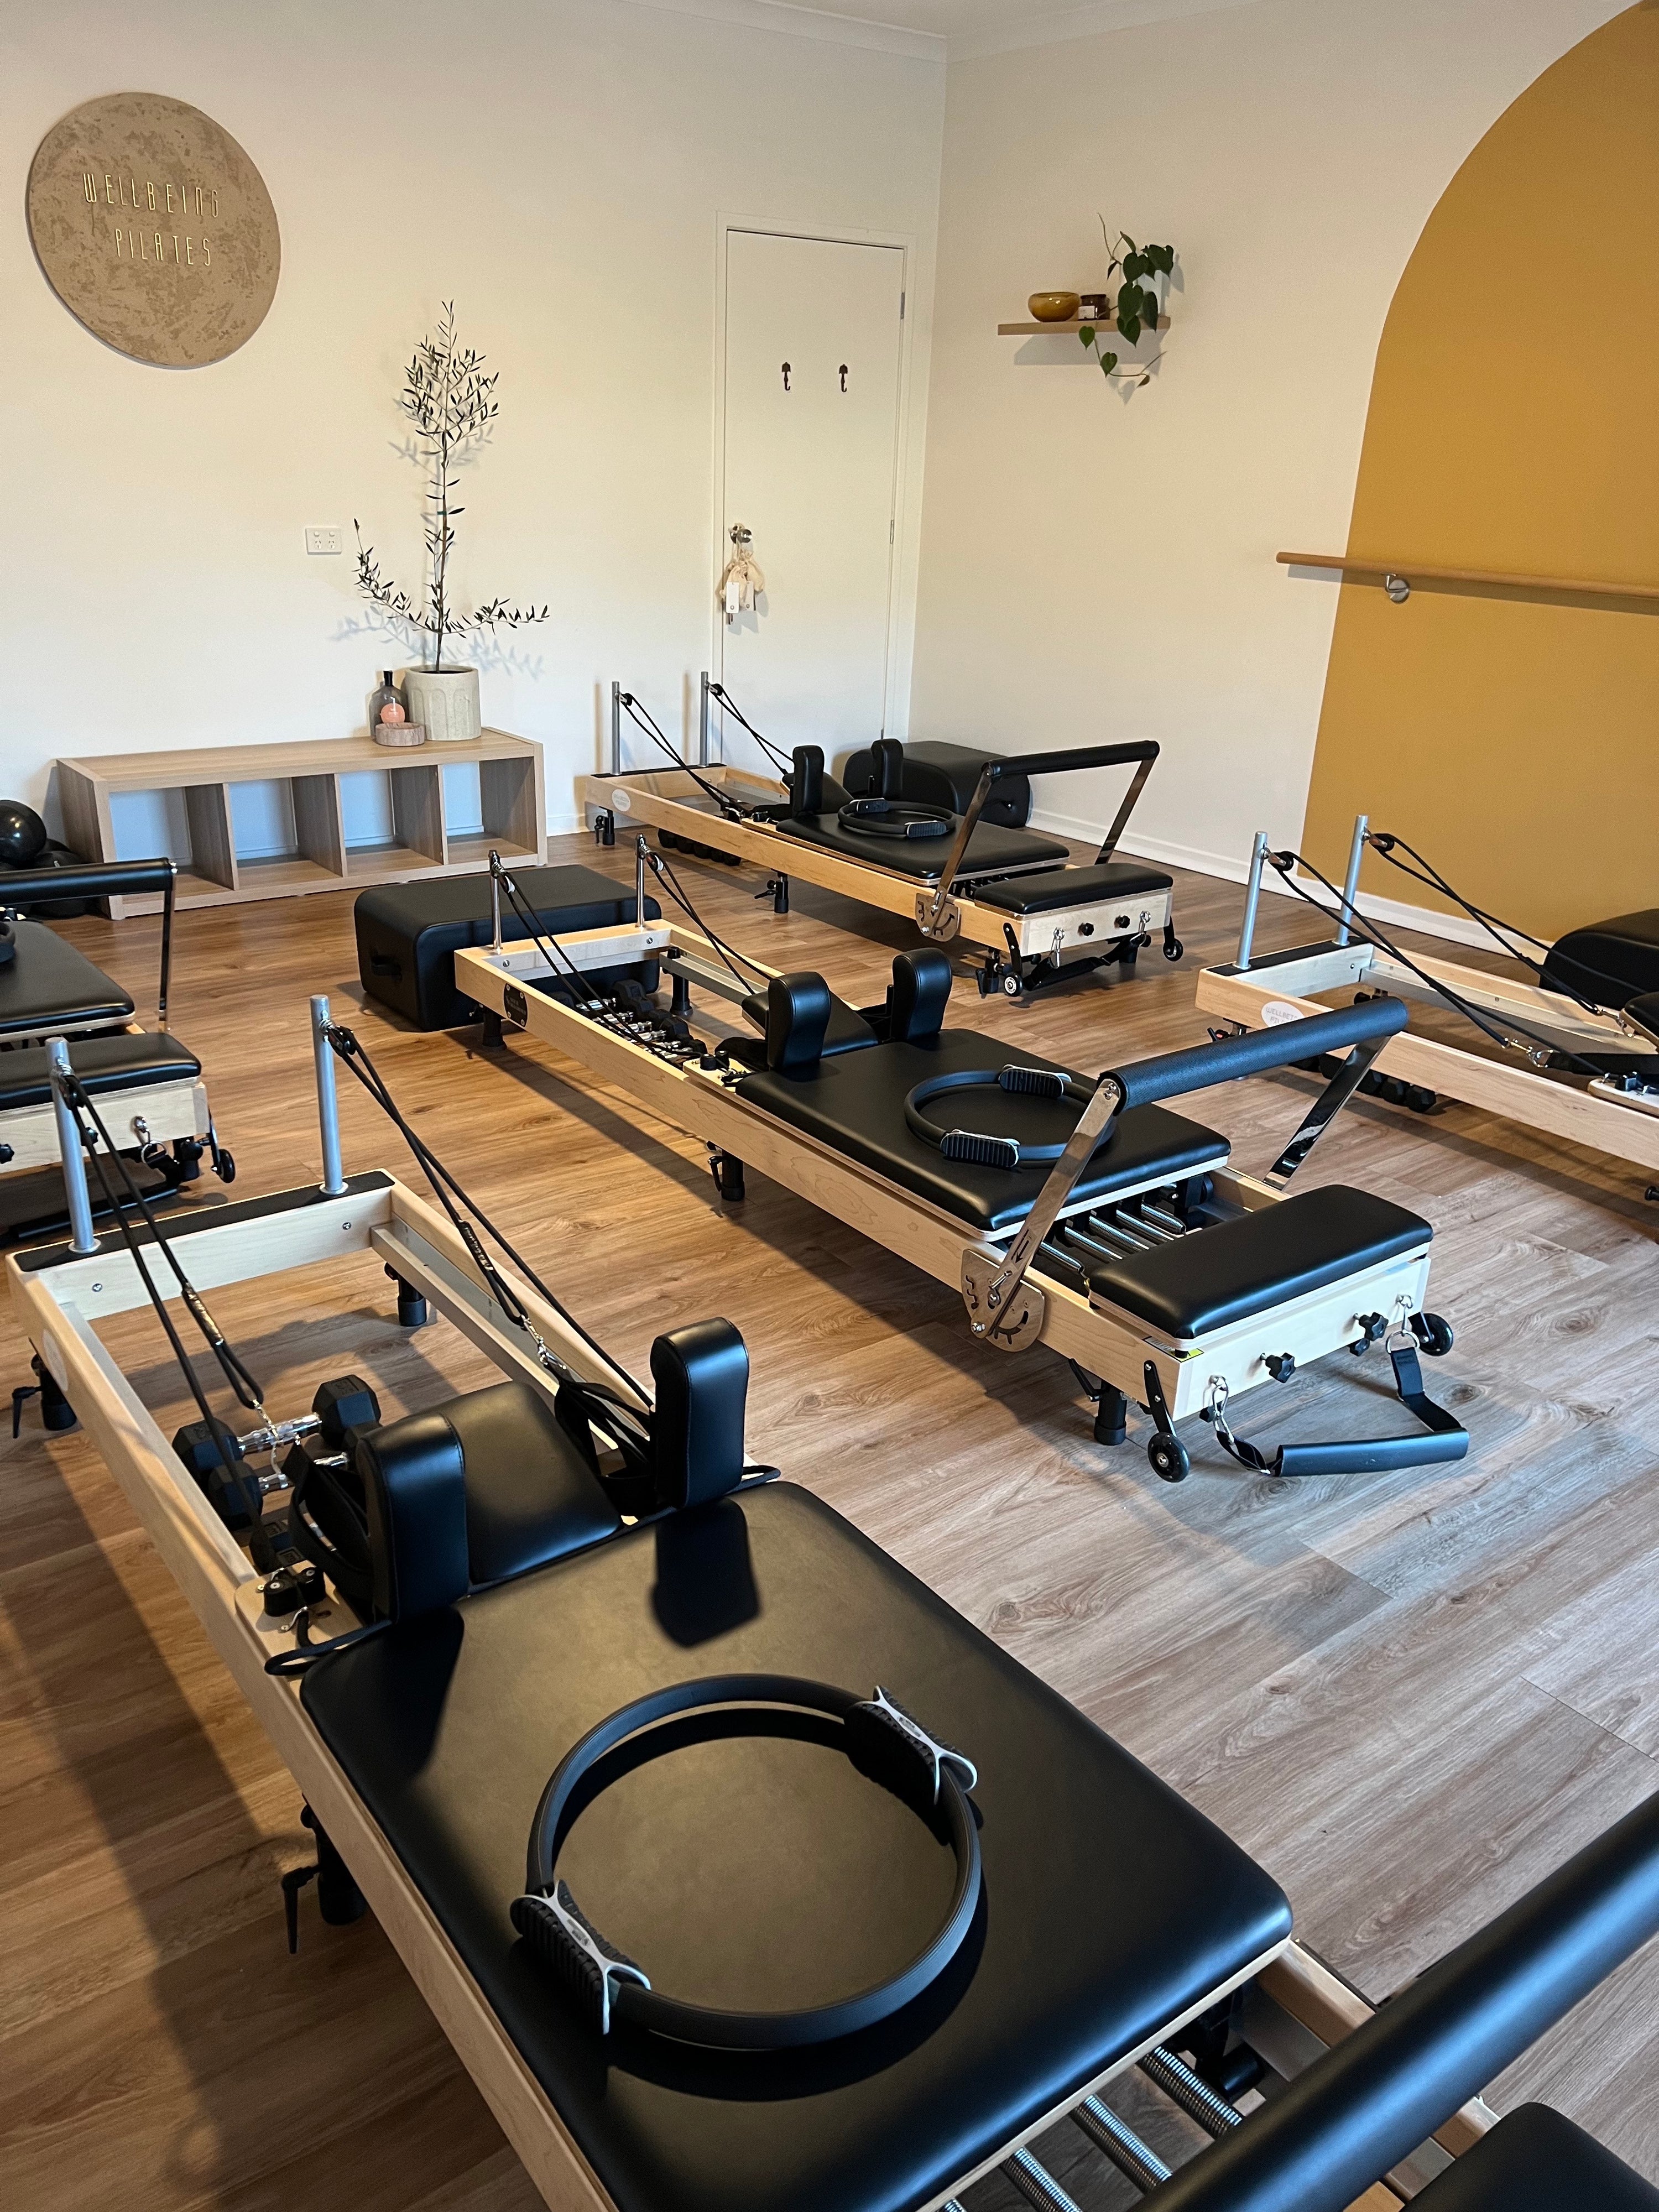 Pilates Reformer Sessions London W2 – Private Pilates Paddington – Peacock Pilates  Reformer Studio6